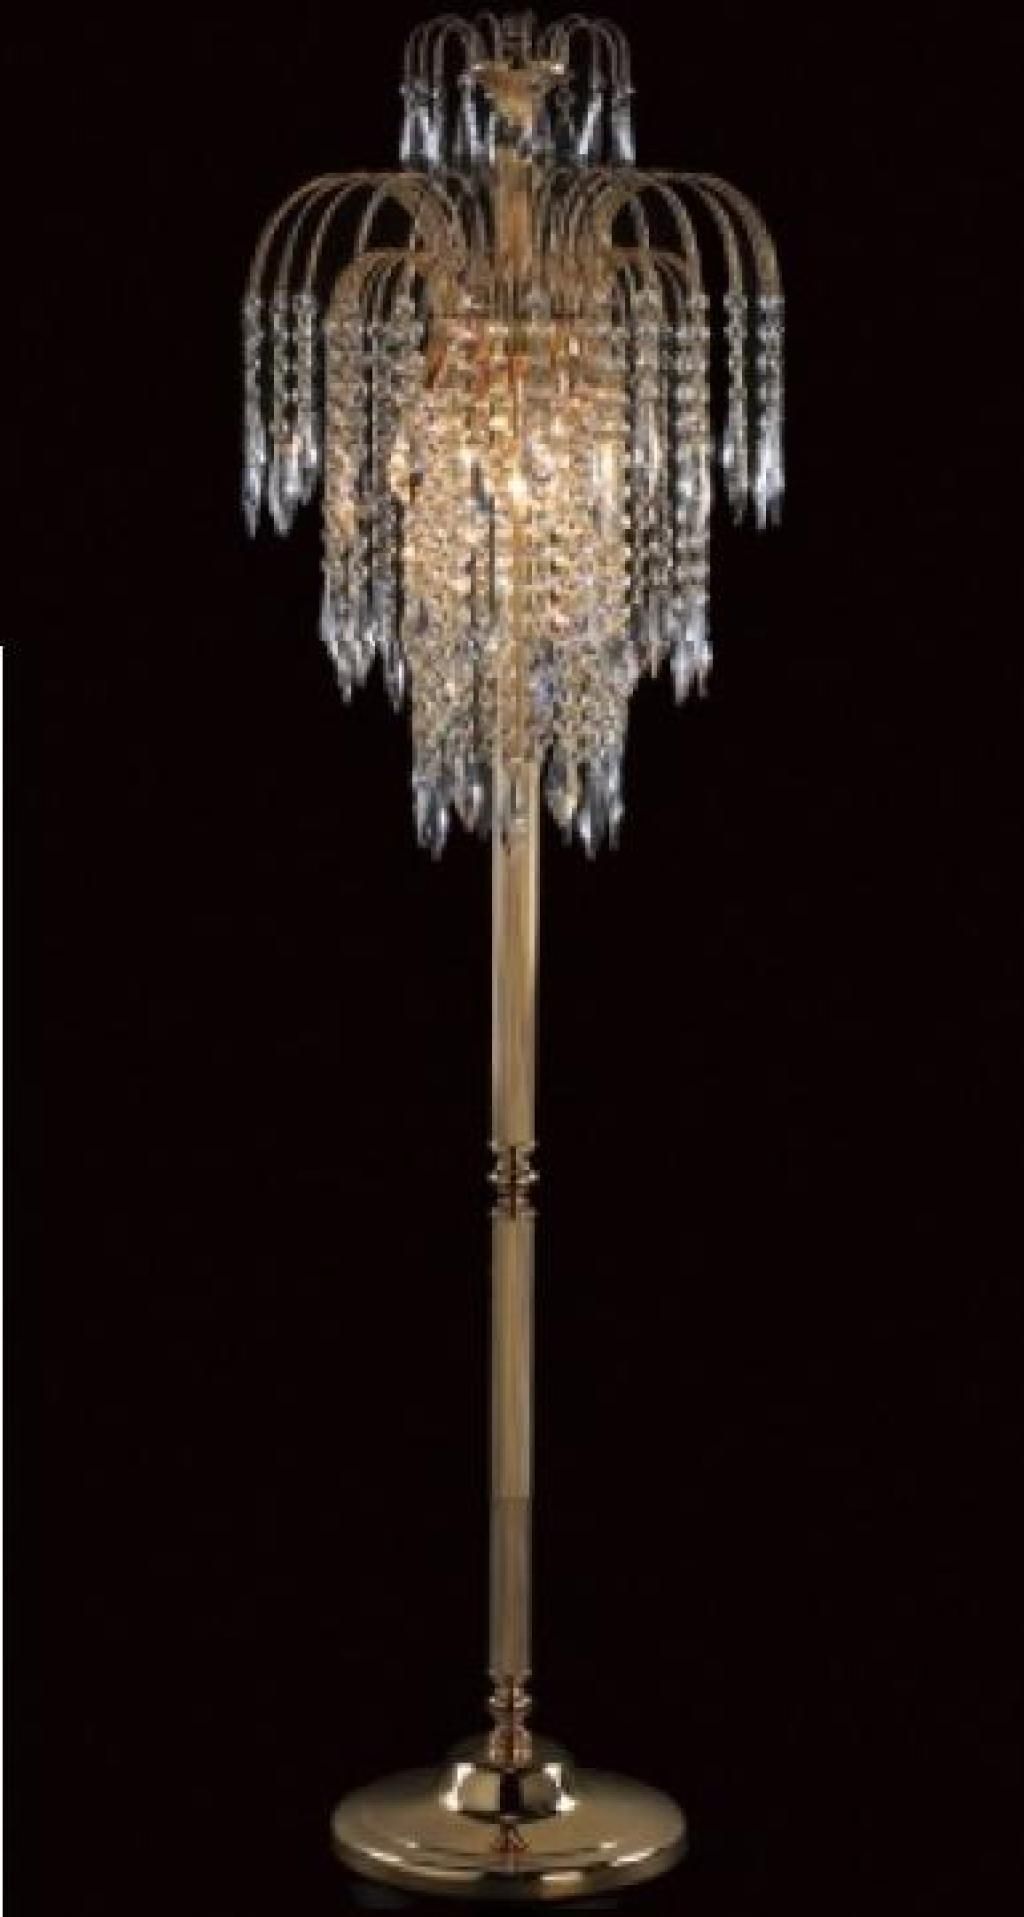 Chandelier Table Lamp Uk Xiedp Lights Decoration Inside Weird Chandeliers (Photo 10 of 15)